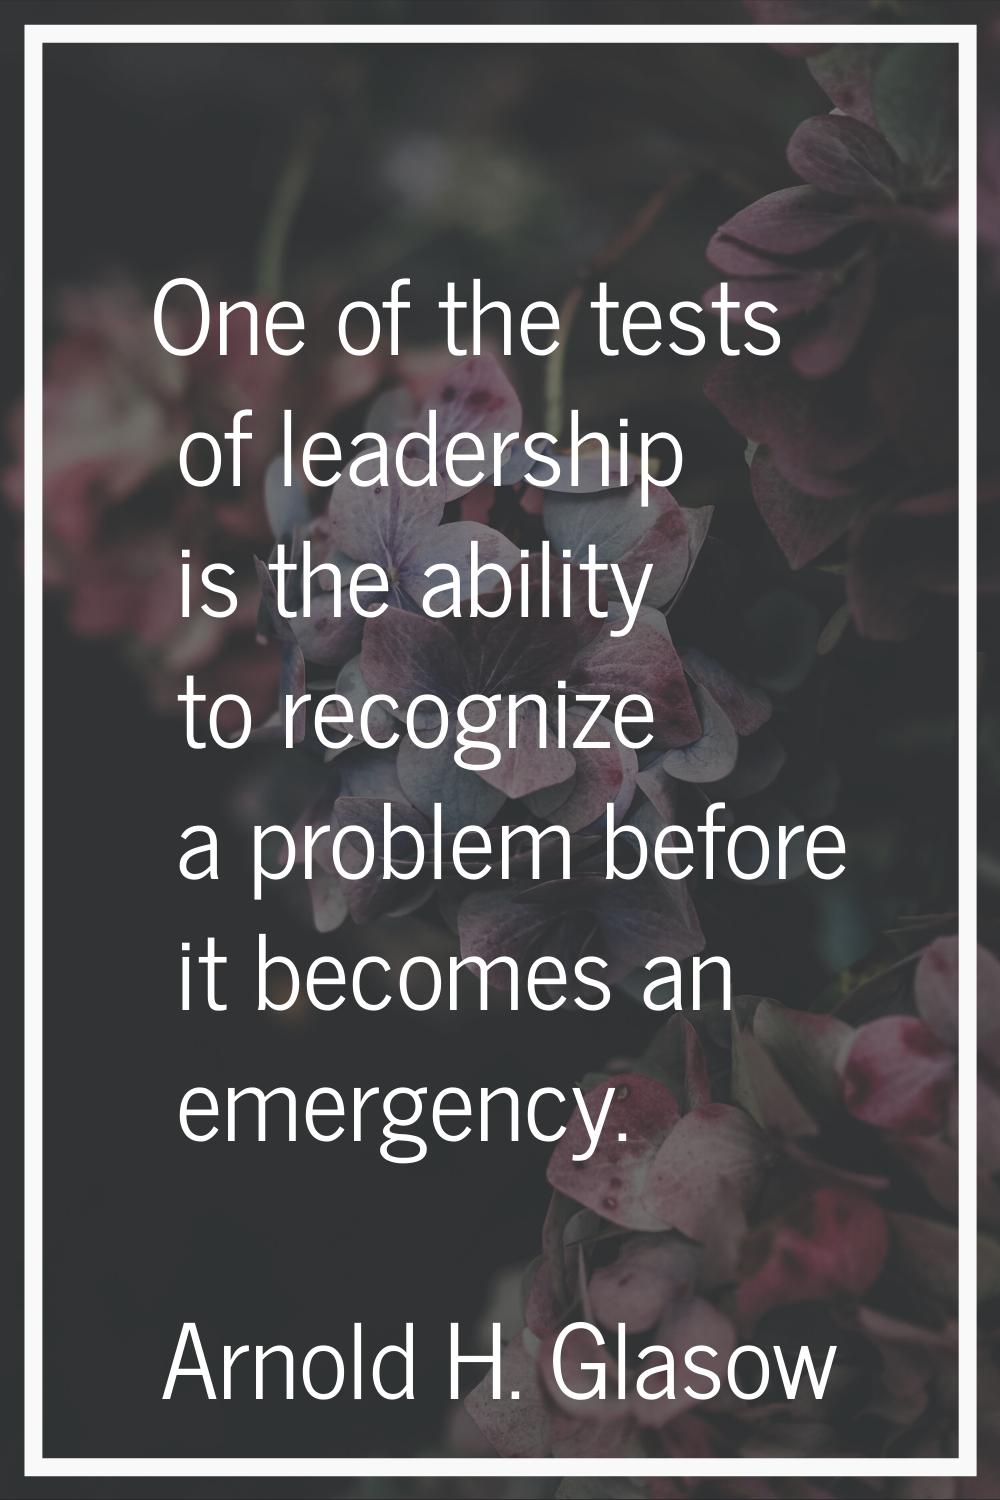 One of the tests of leadership is the ability to recognize a problem before it becomes an emergency